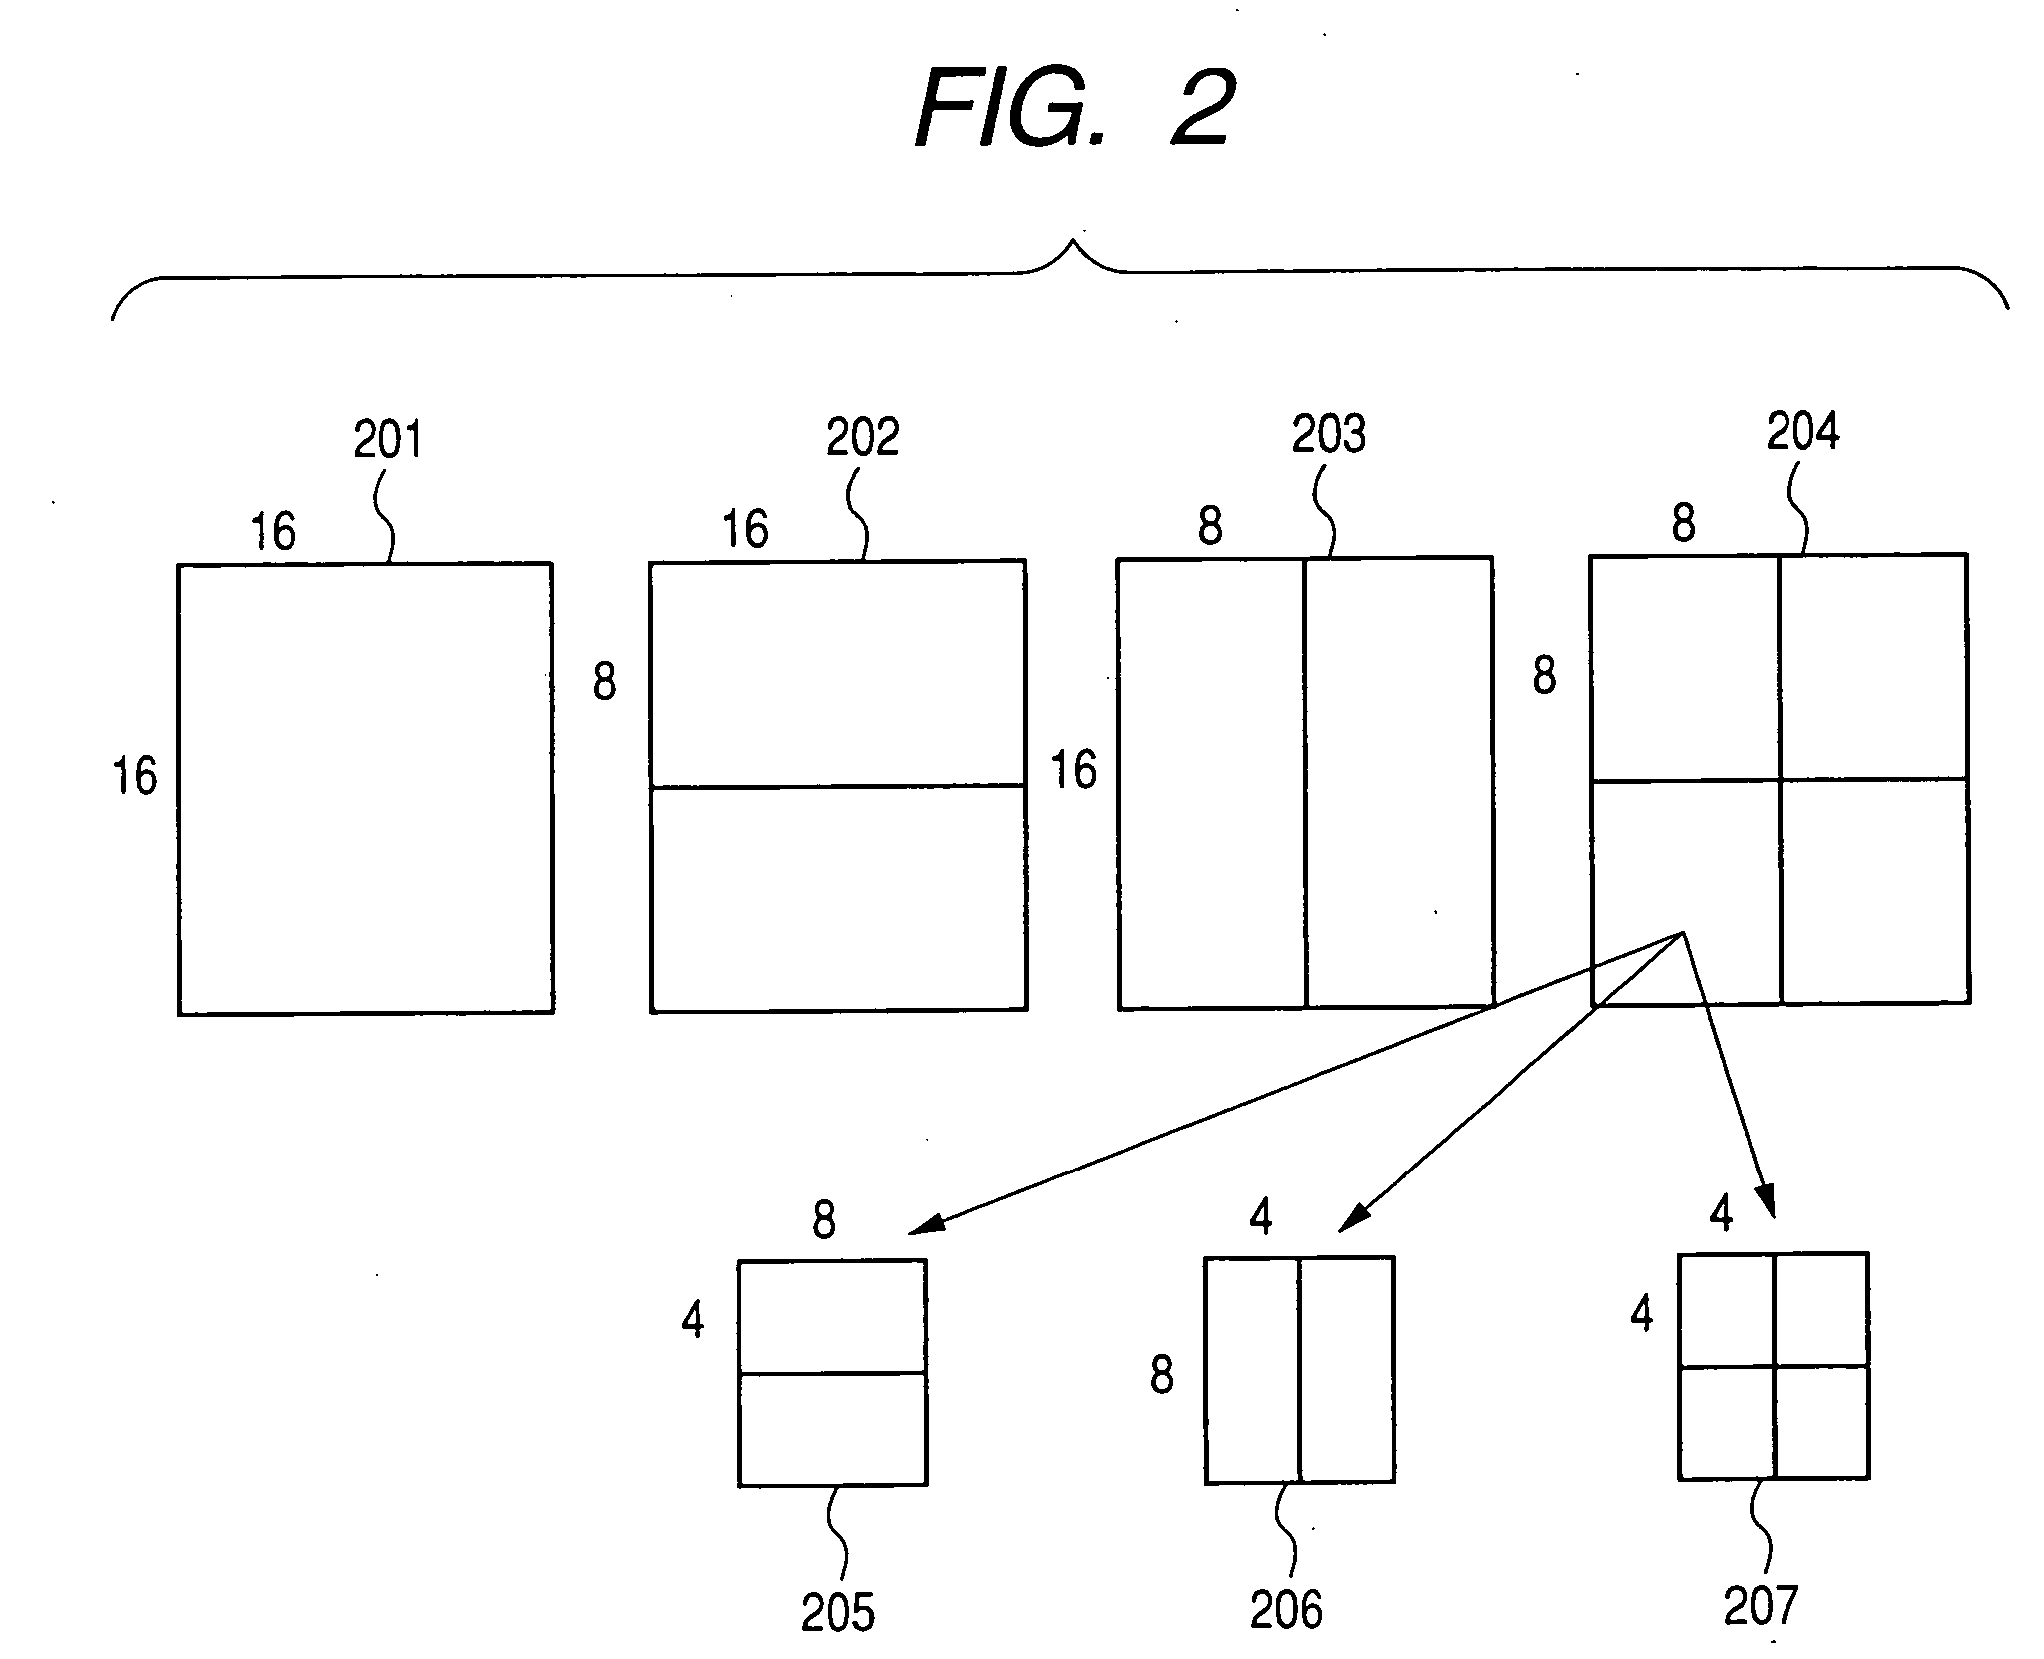 Motion compensation image coding device and coding method